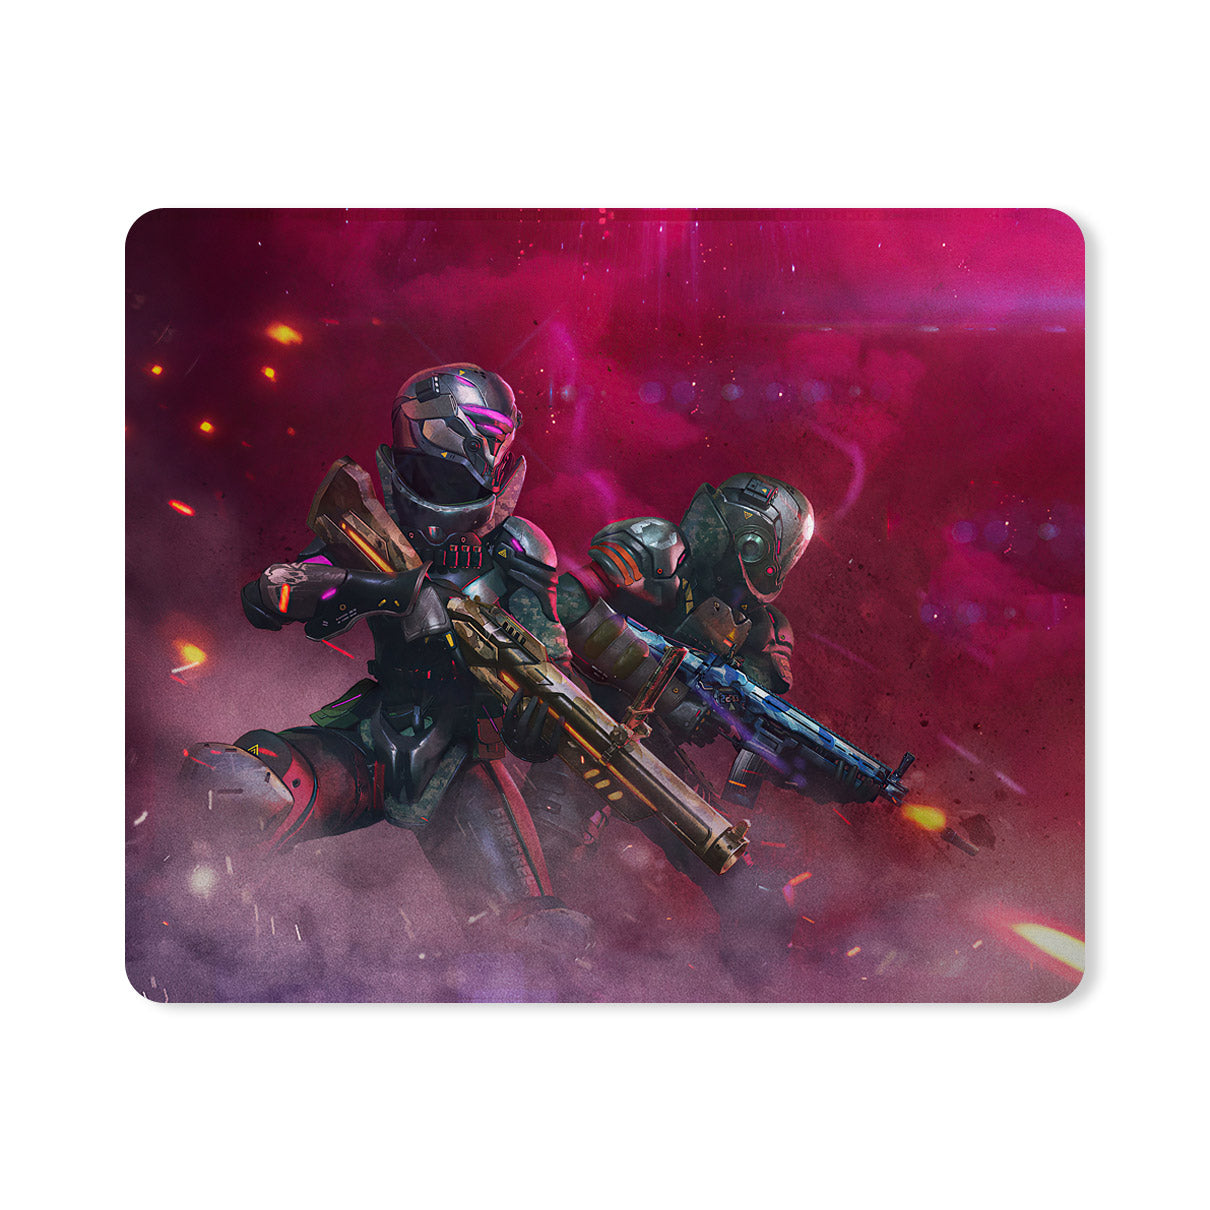 Robot Fighter Designer Printed Premium Mouse pad (9 in x 7.5 in)